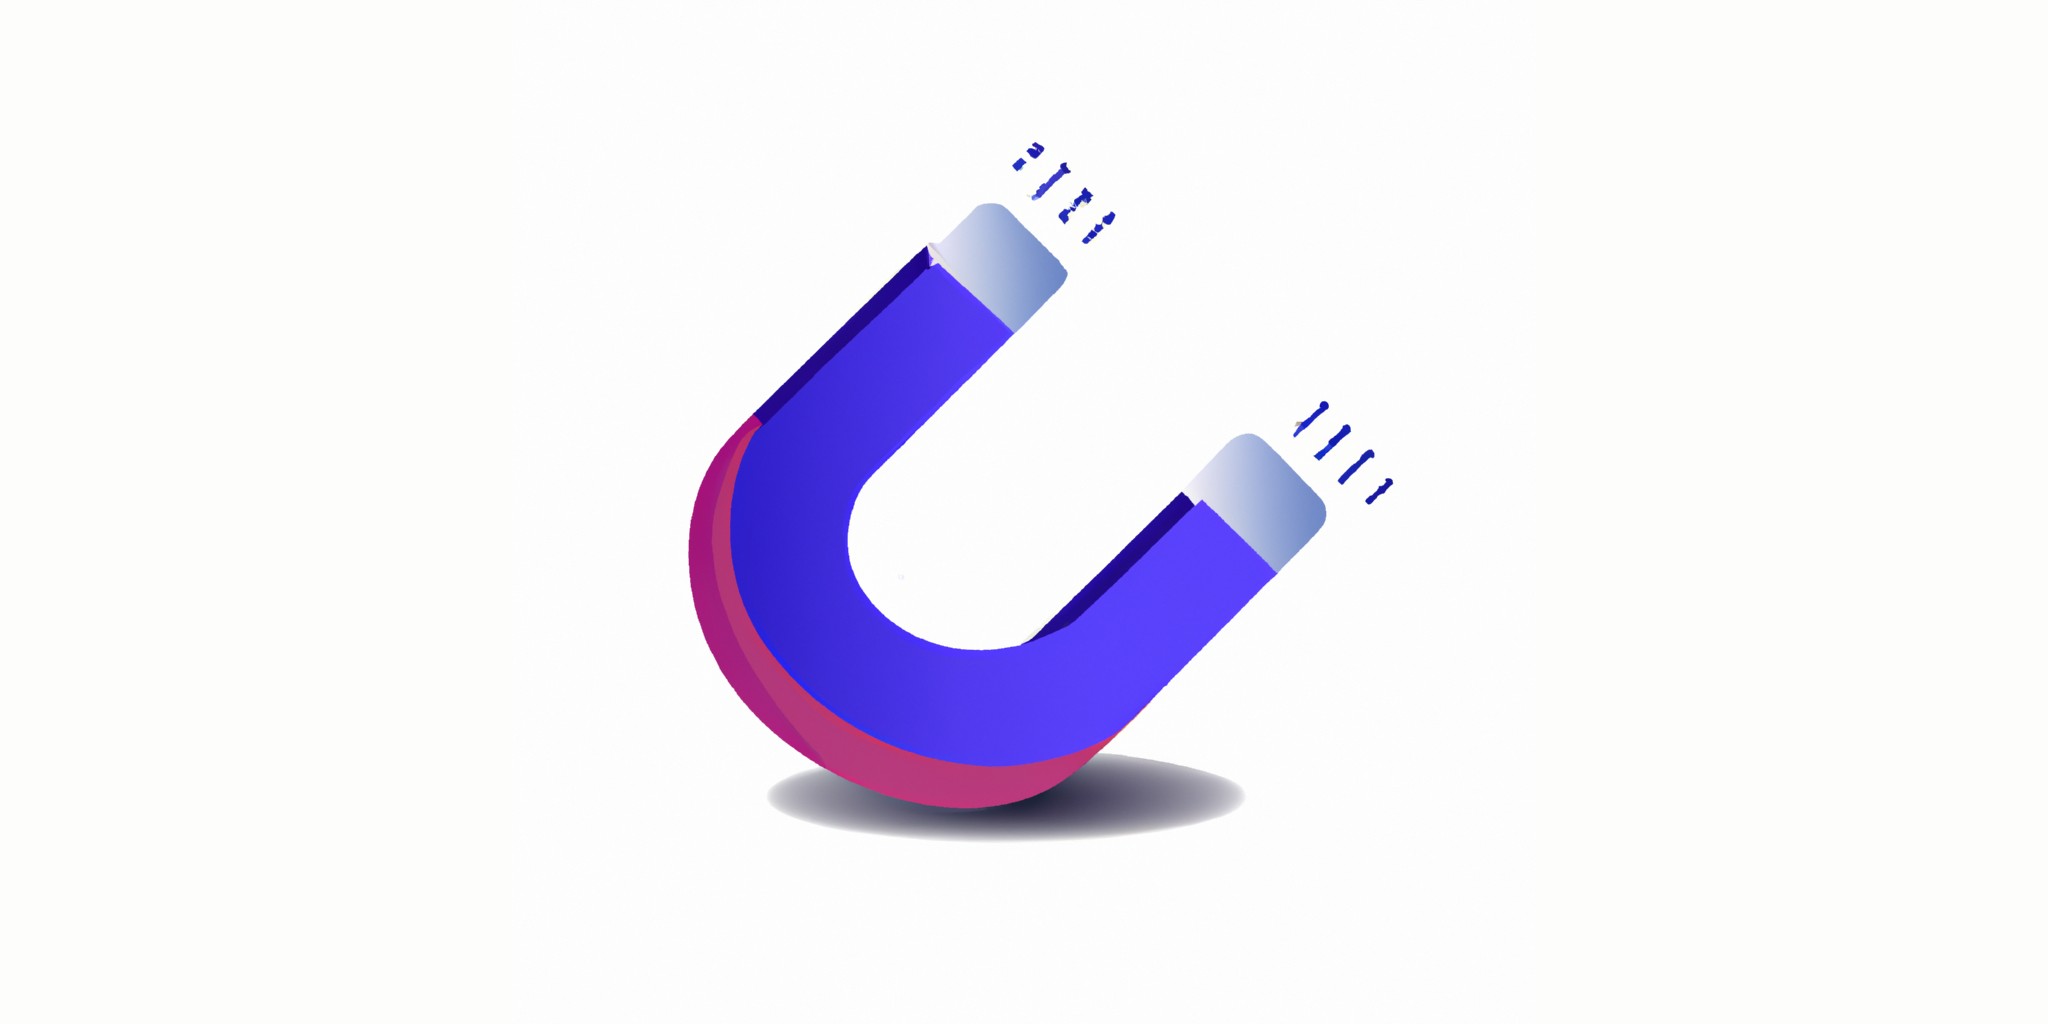 a magnet in flat illustration style with gradients and white background